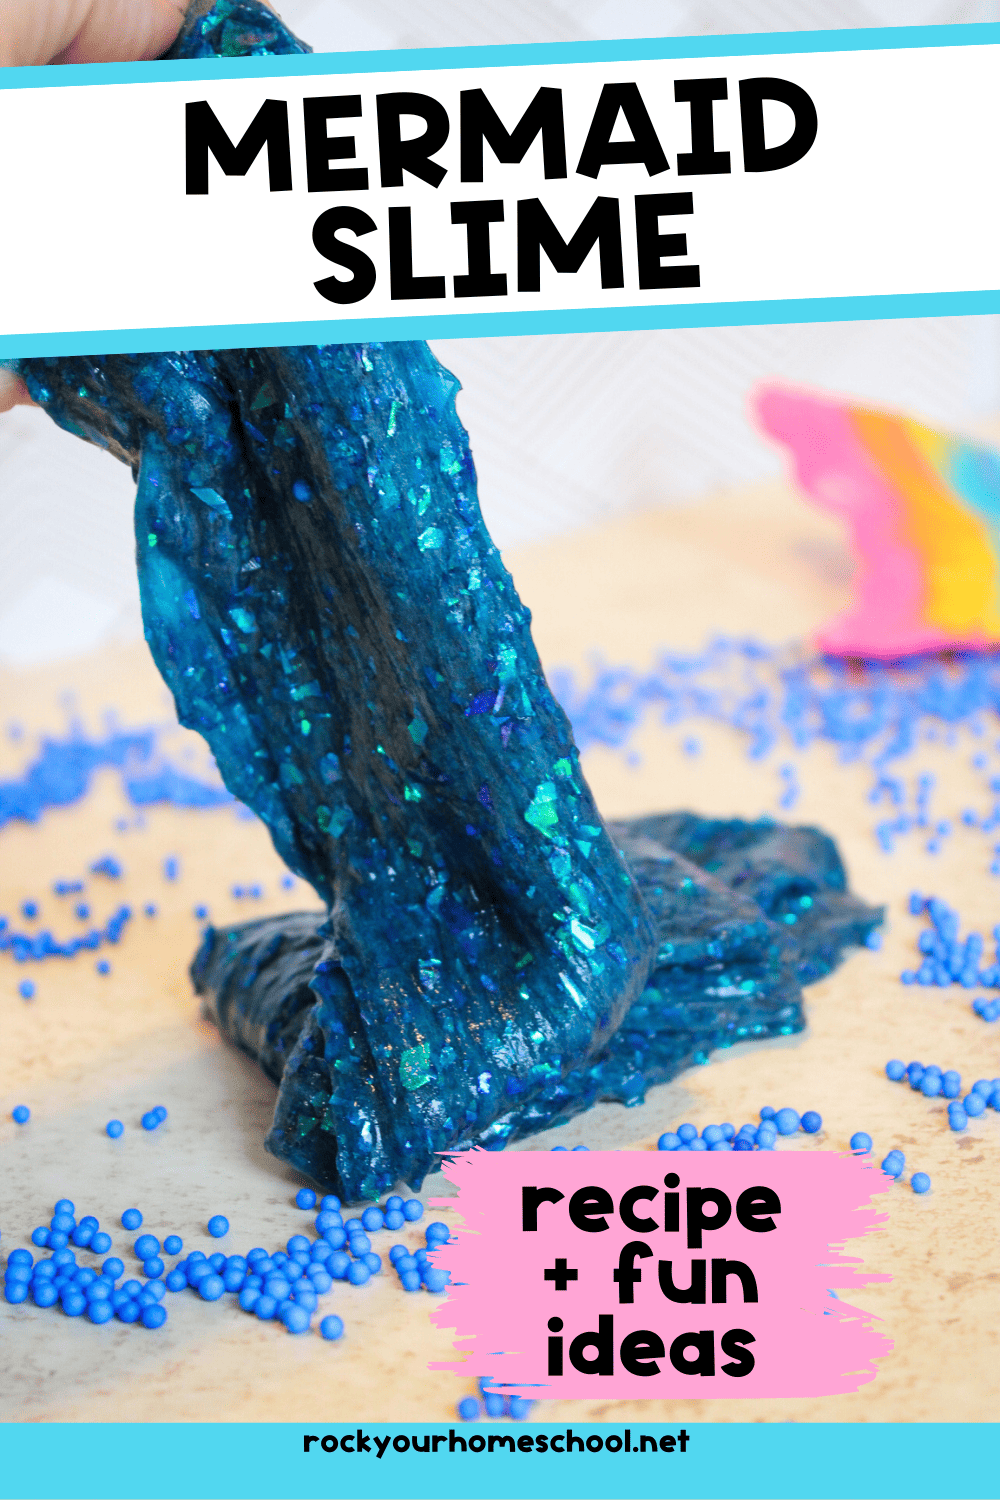 Mermaid slime in blues and greens with glitter and mermaid tail in background.